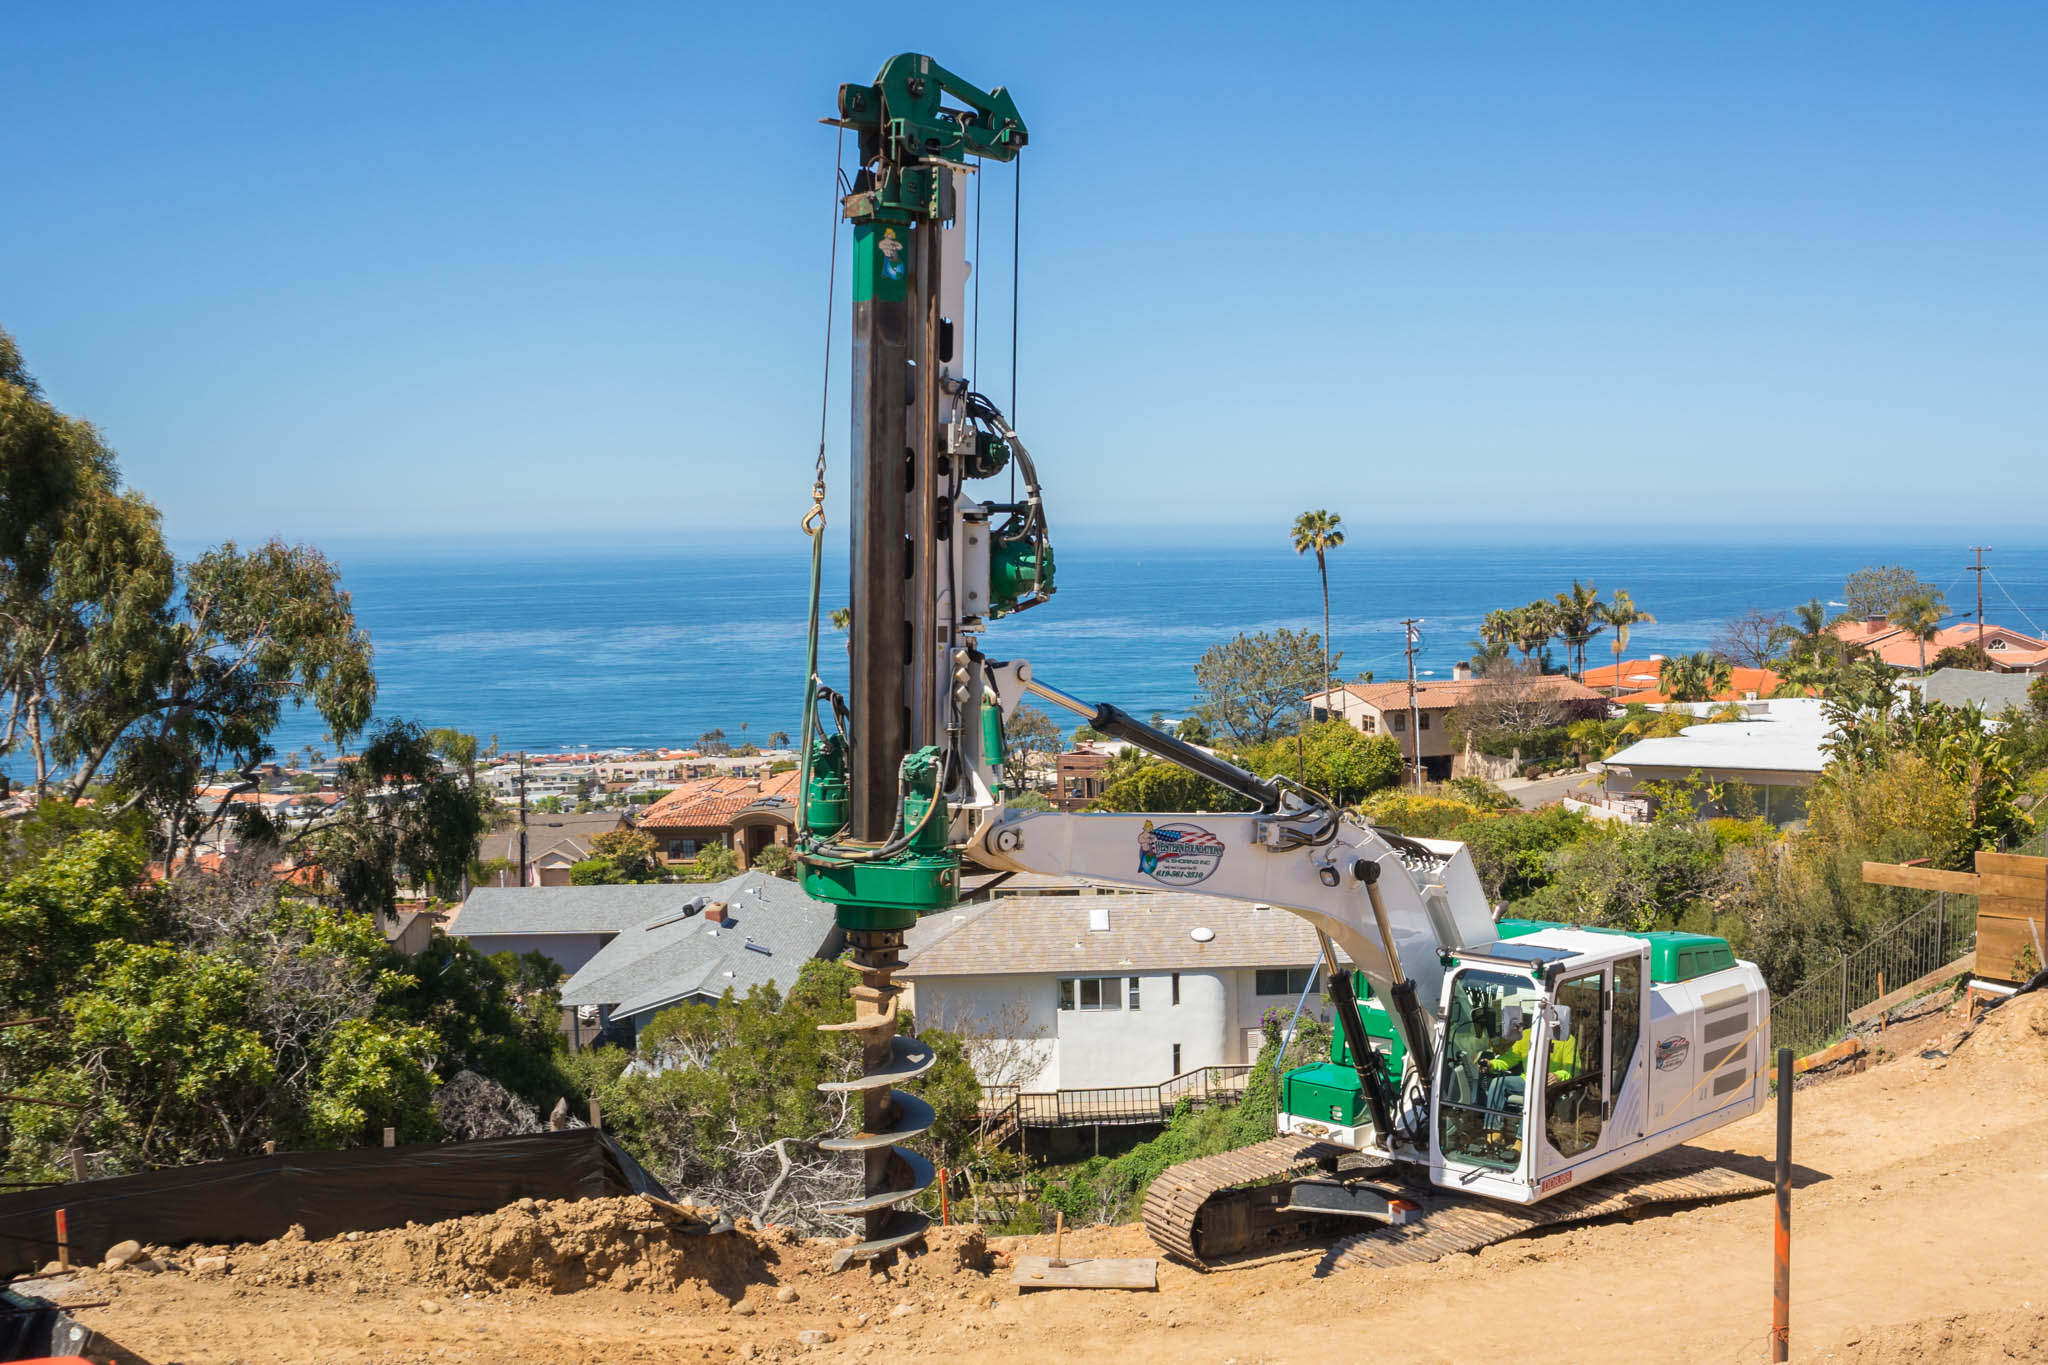 Drilling into earth in front of homes with ocean in background for a caisson drilling project in La Jolla, CA